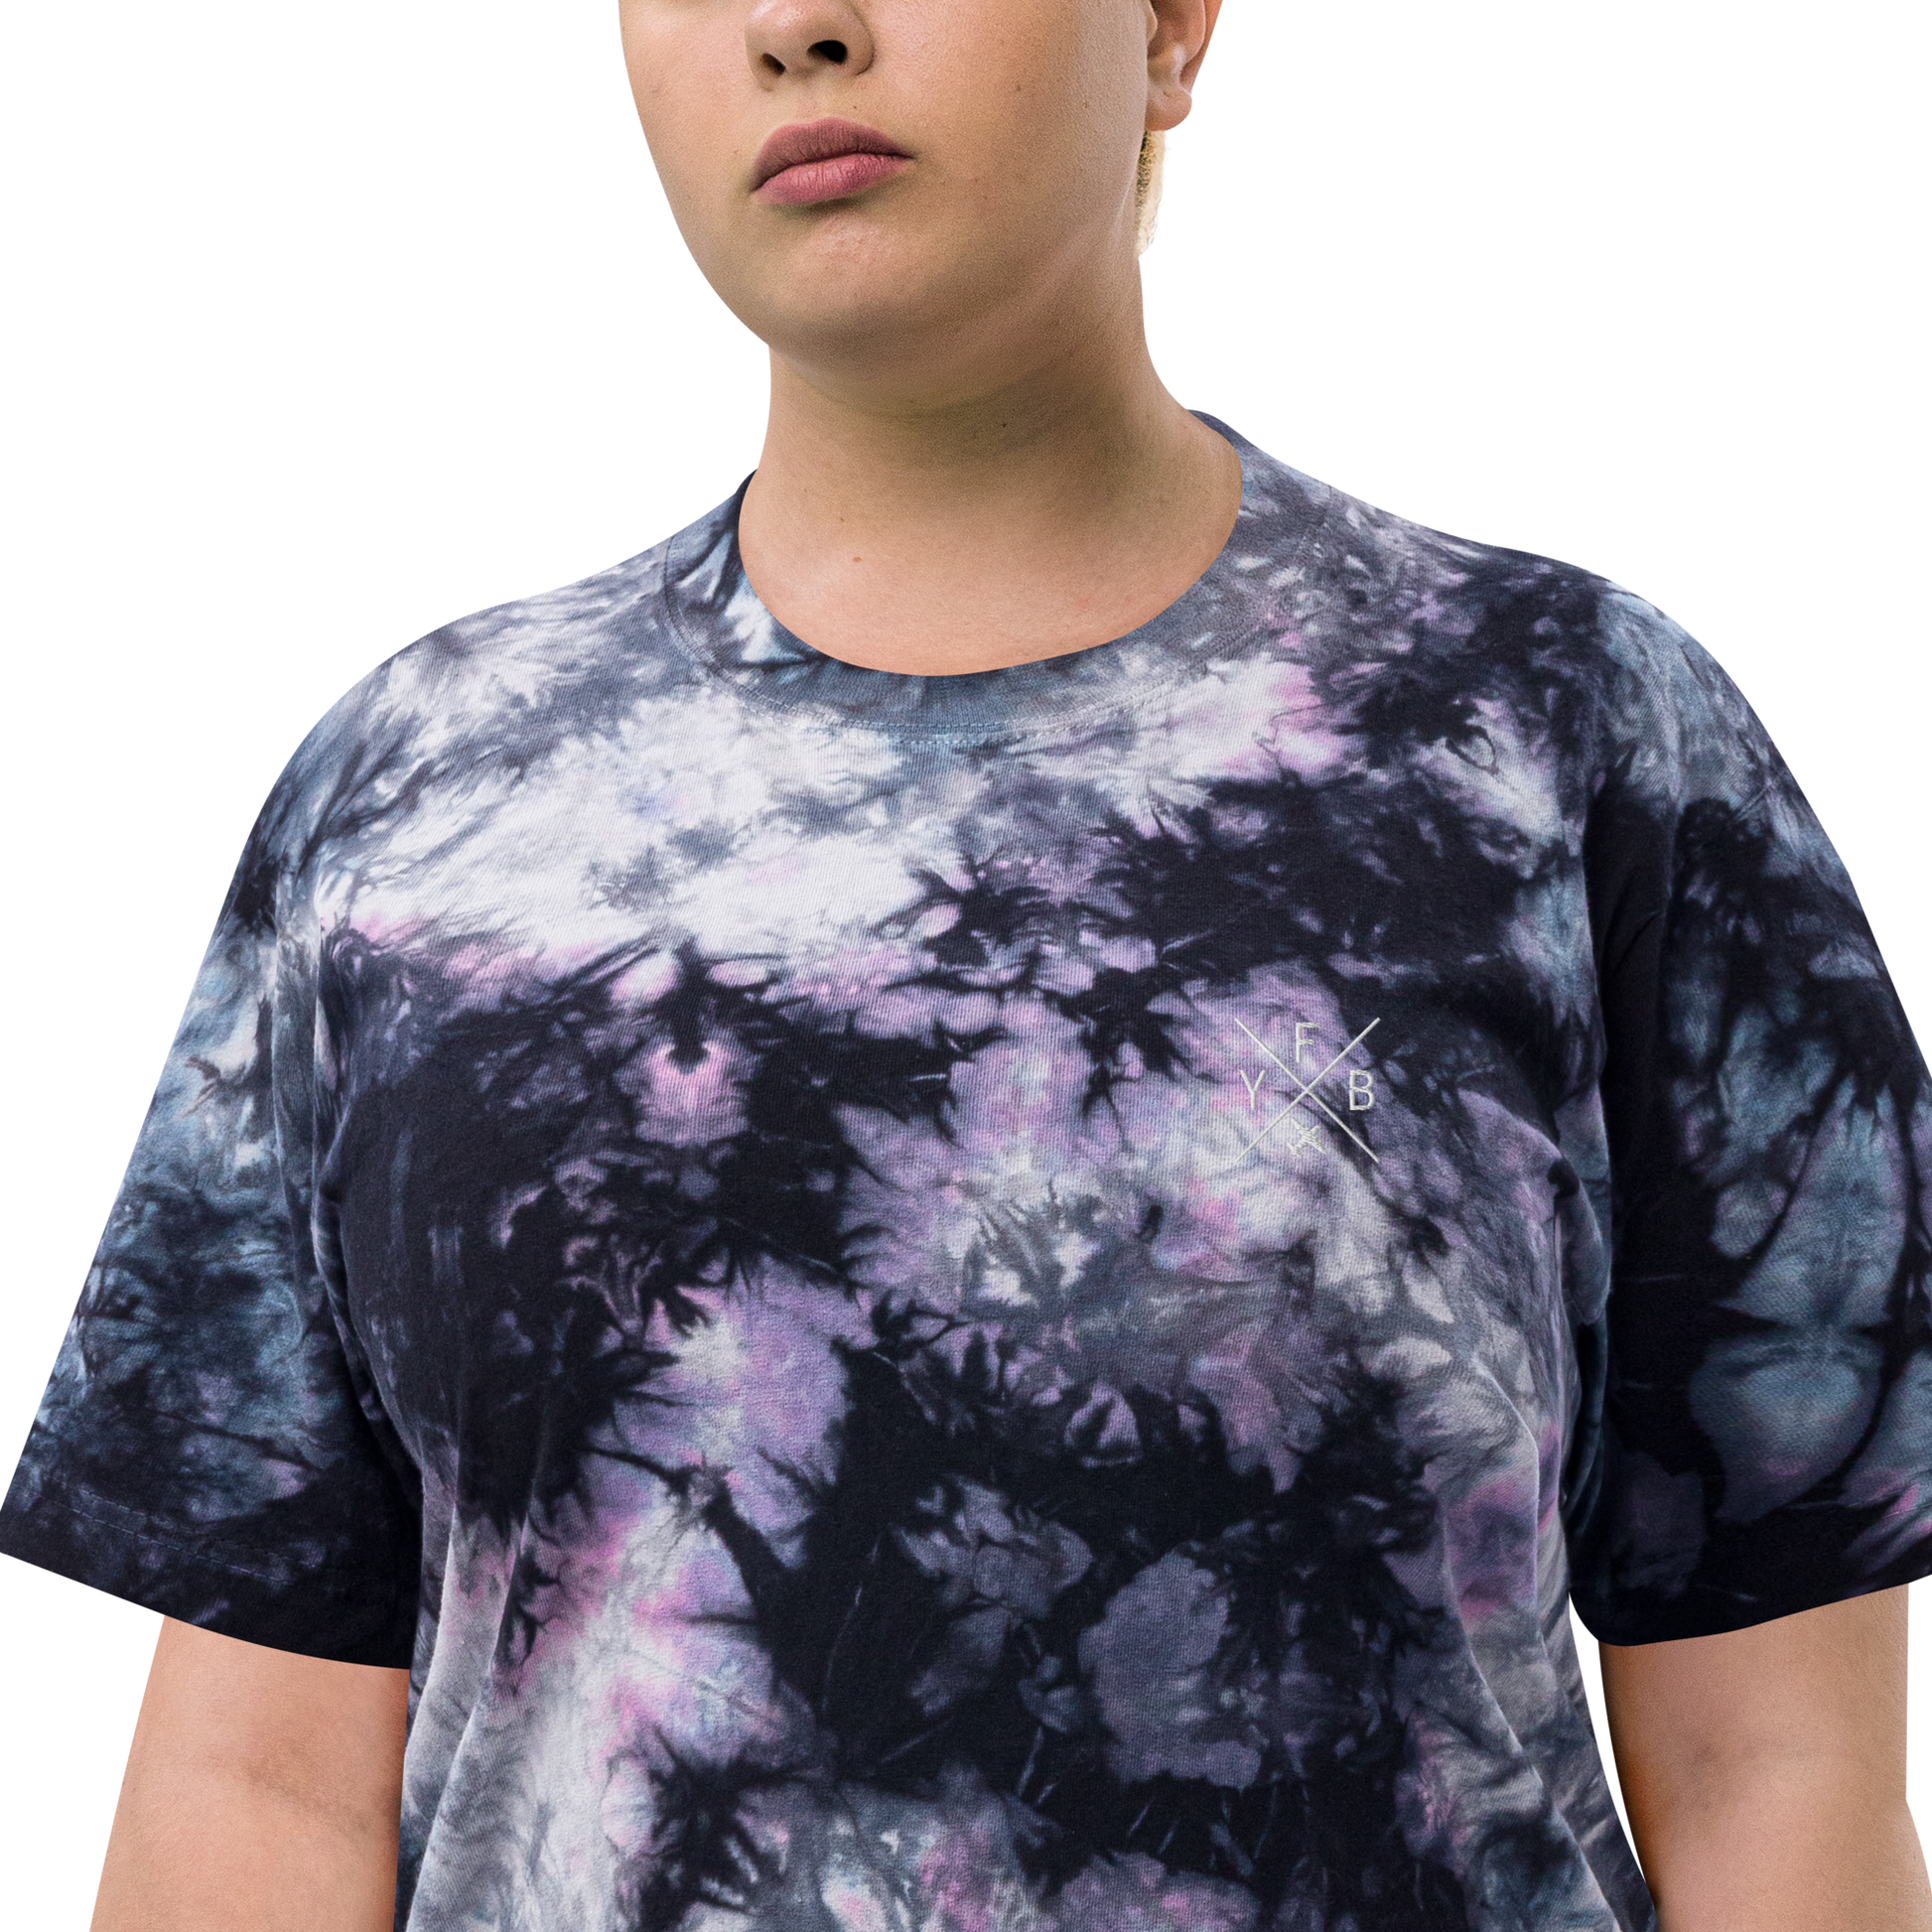 YHM Designs - YFB Iqaluit Oversized Tie-Dye T-Shirt - Crossed-X Design with Airport Code and Vintage Propliner - White Embroidery - Image 07